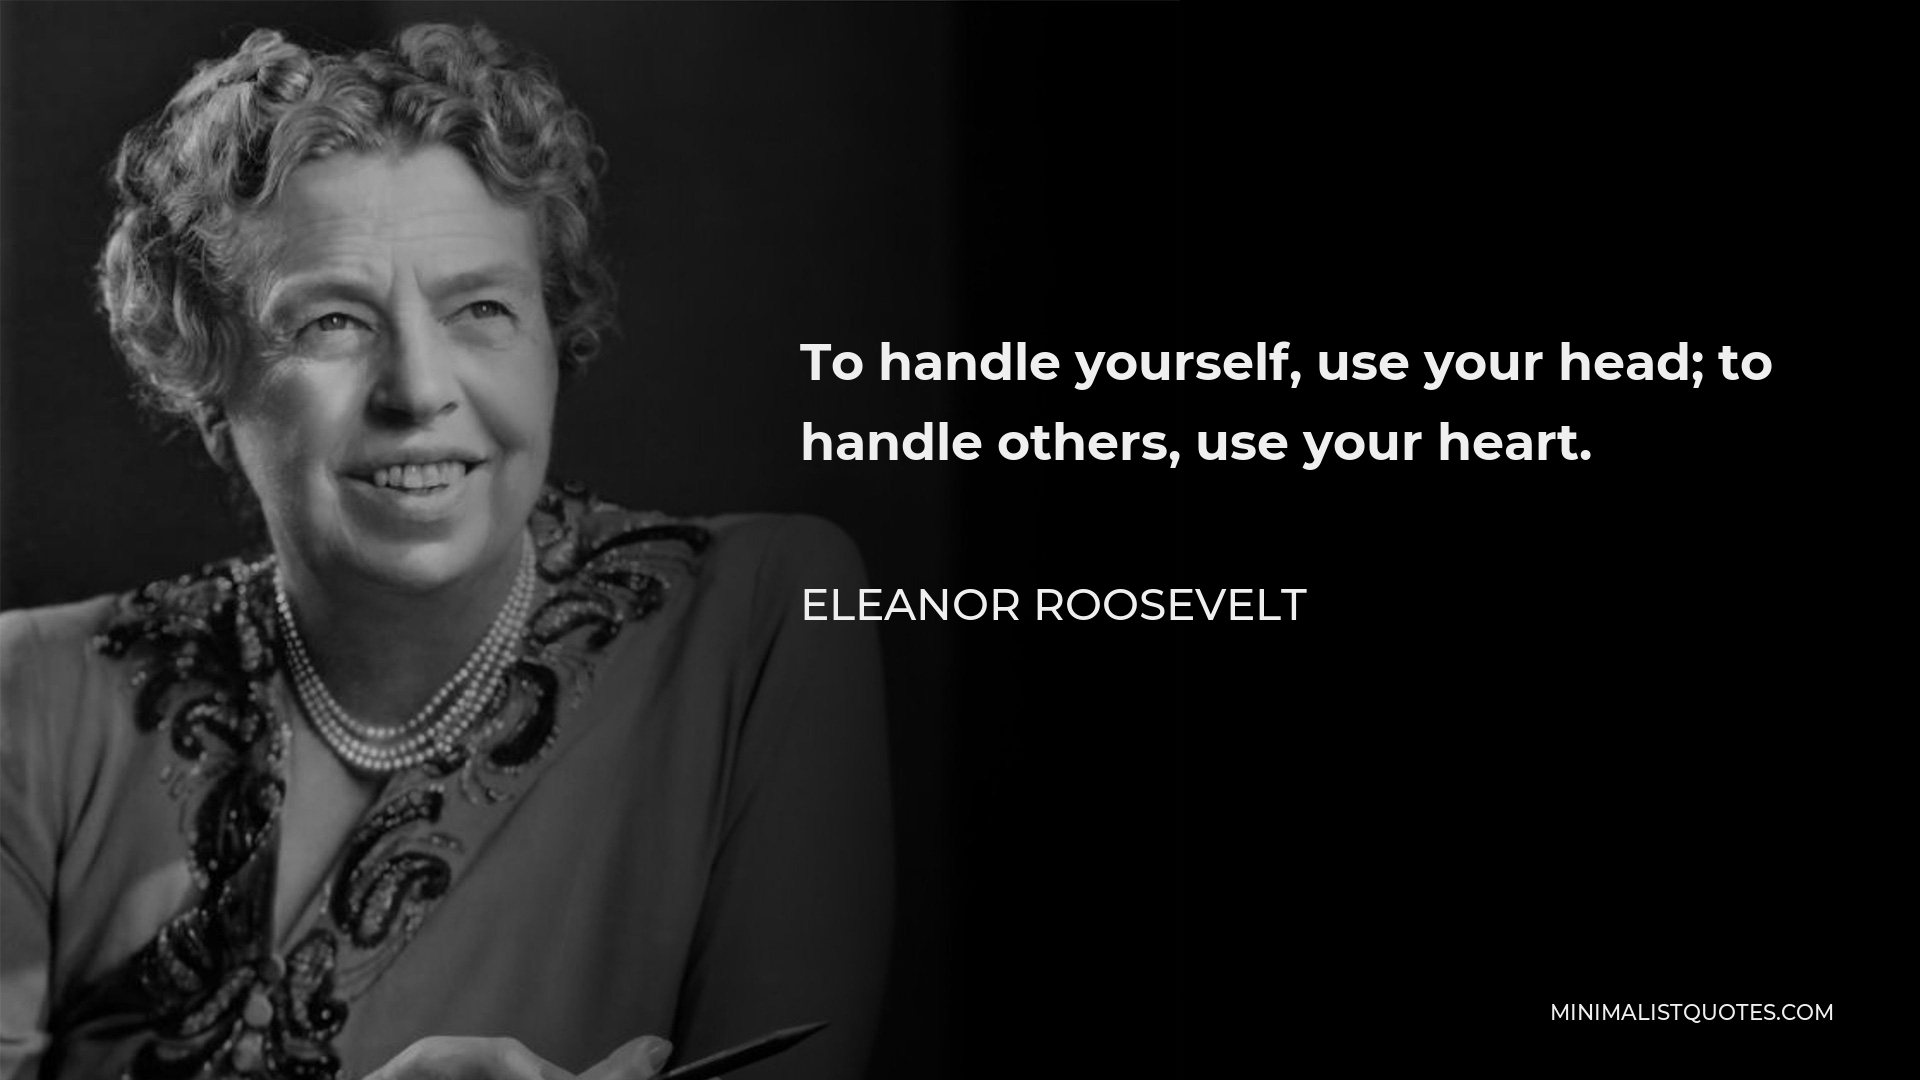 Eleanor Roosevelt Quote - To handle yourself, use your head; to handle others, use your heart.